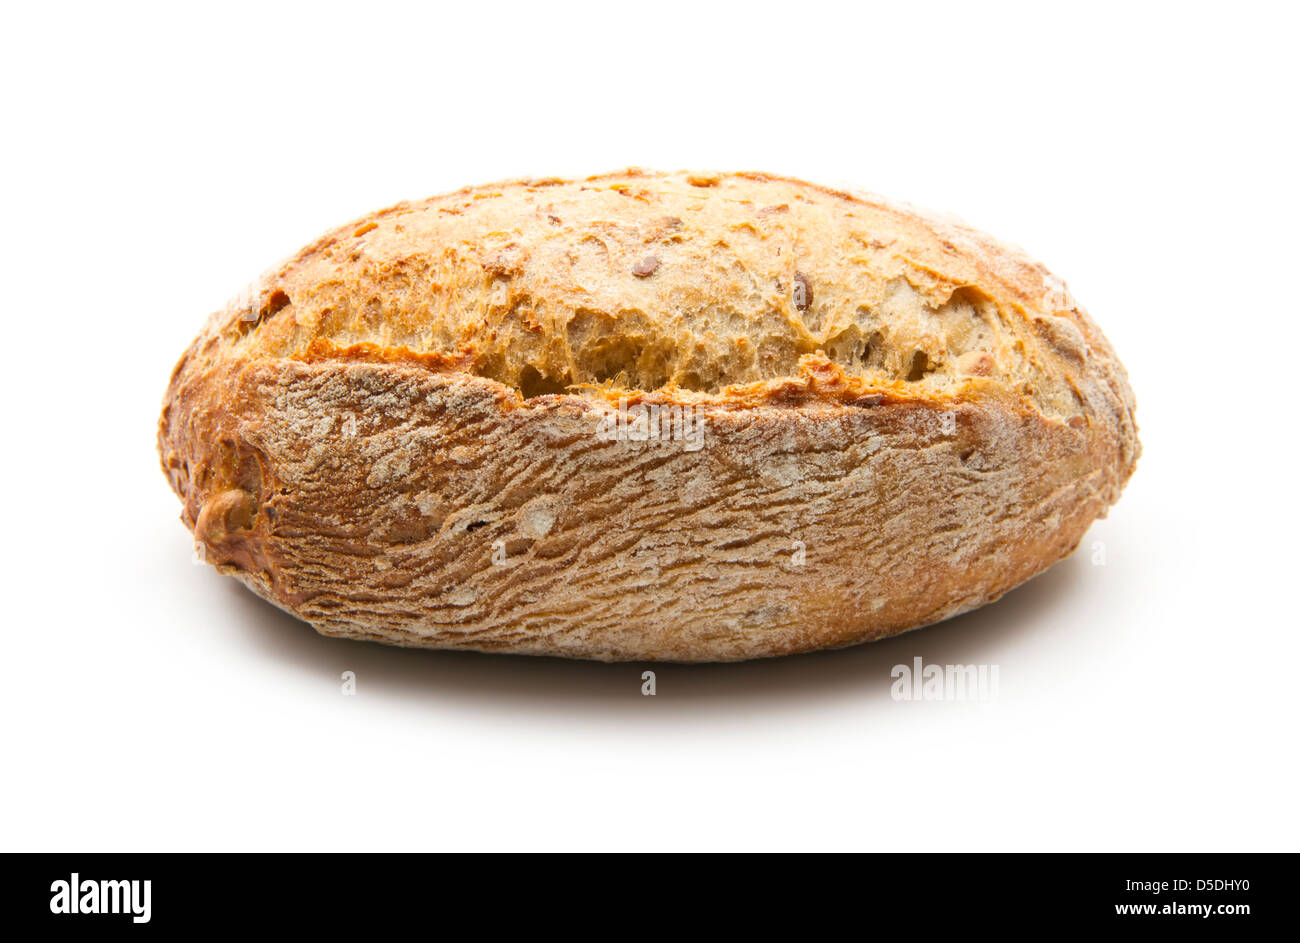 wholemeal bread roll isolated on white background Stock Photo